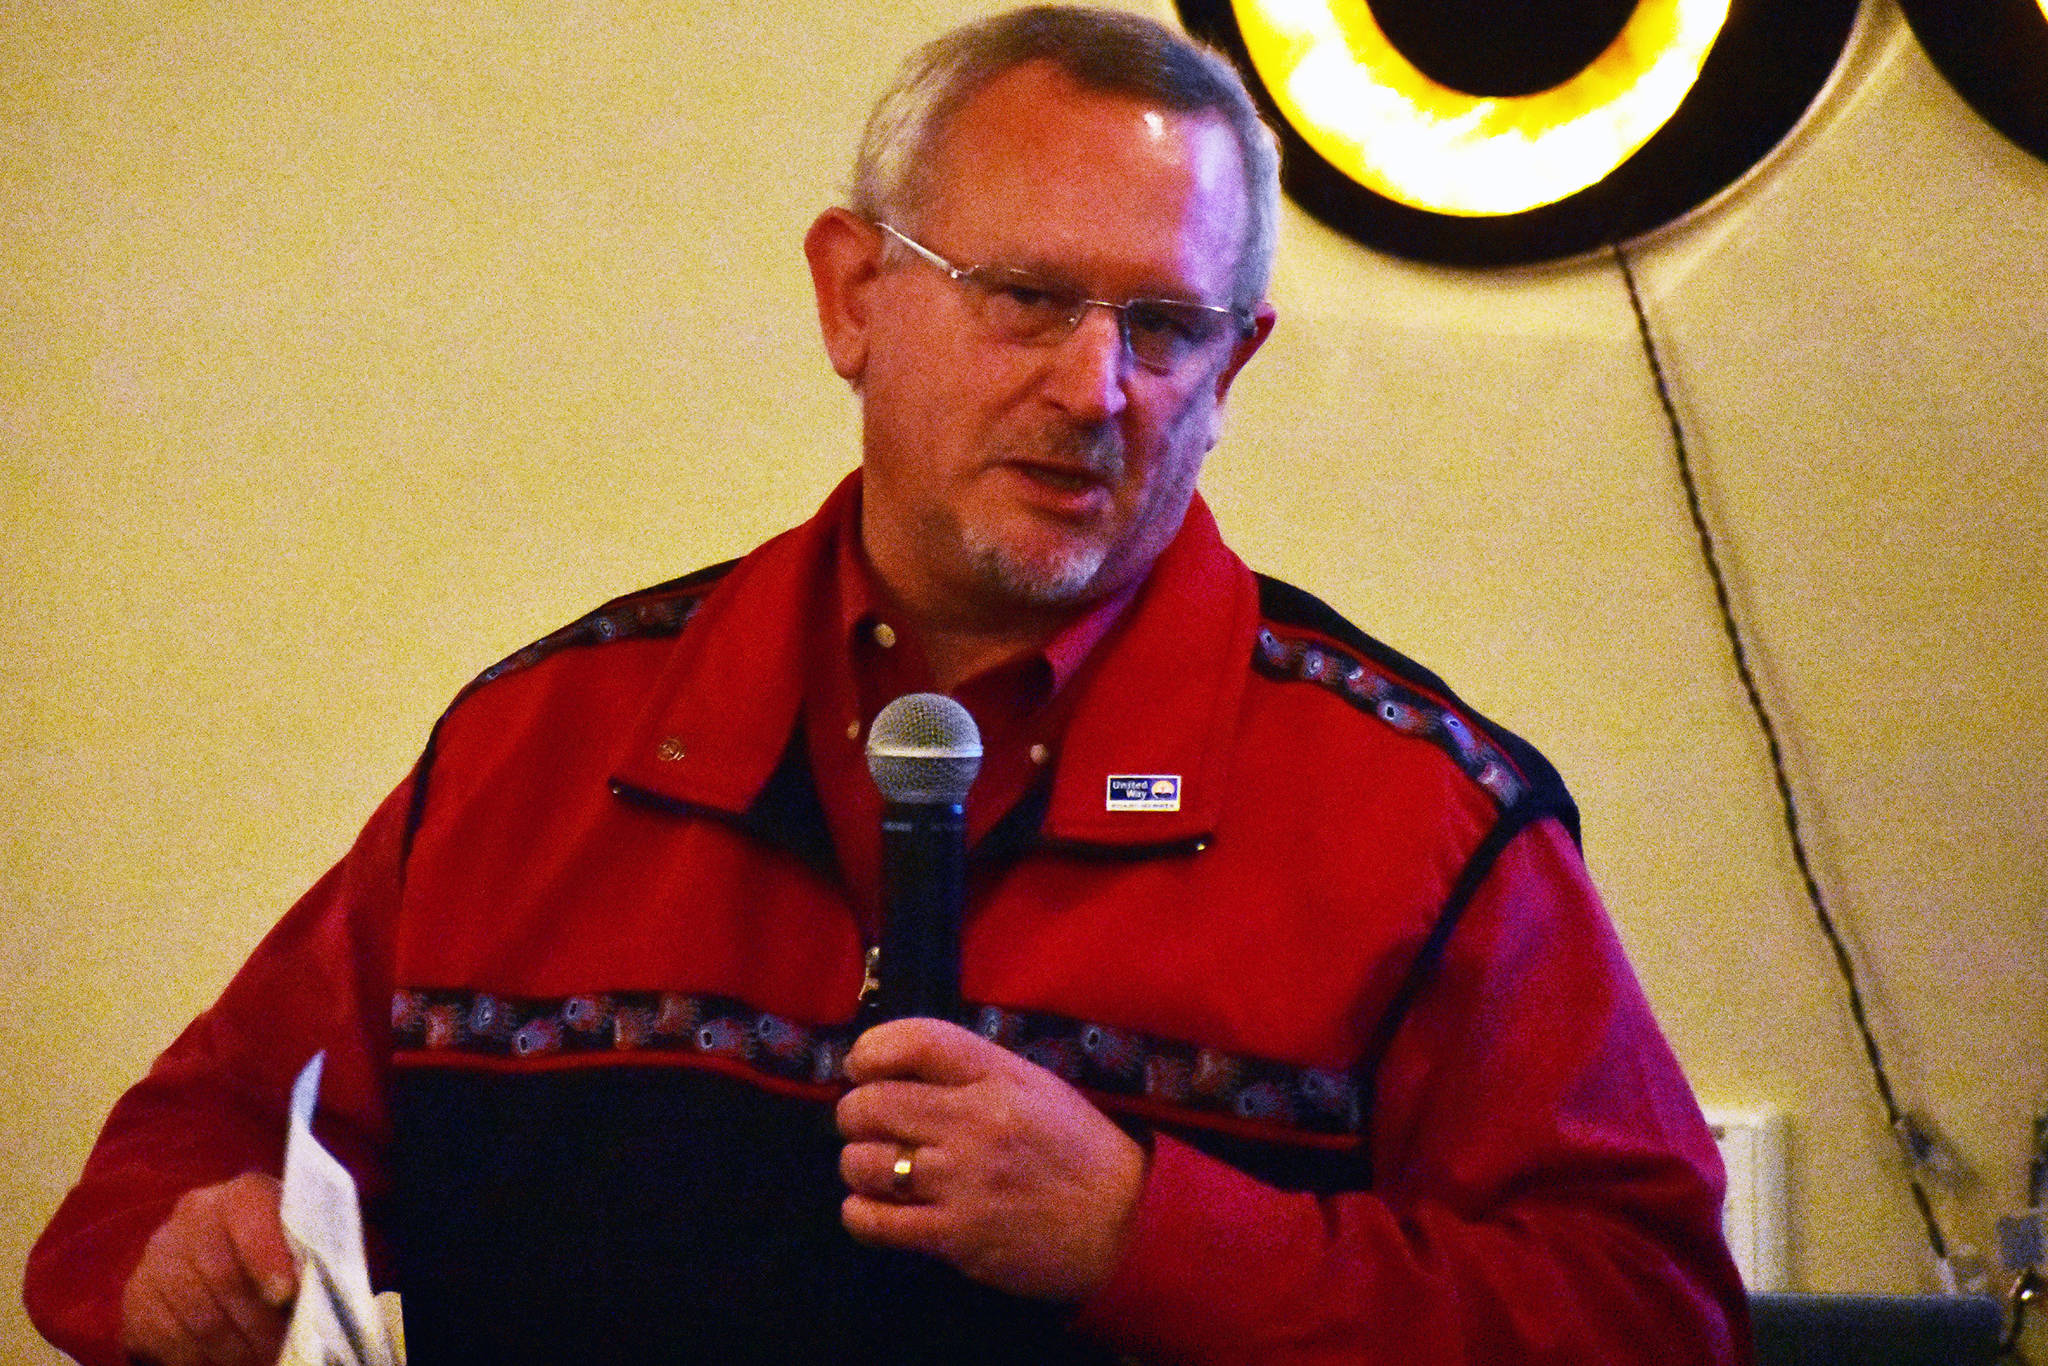 Warren Russell, chair of the Board of Directors for United Way of Southeast Alaska speaks at the Juneau Chamber of Commerce Luncheon on Thursday, Oct. 17, 2019. (Peter Segall | Juneau Empire)